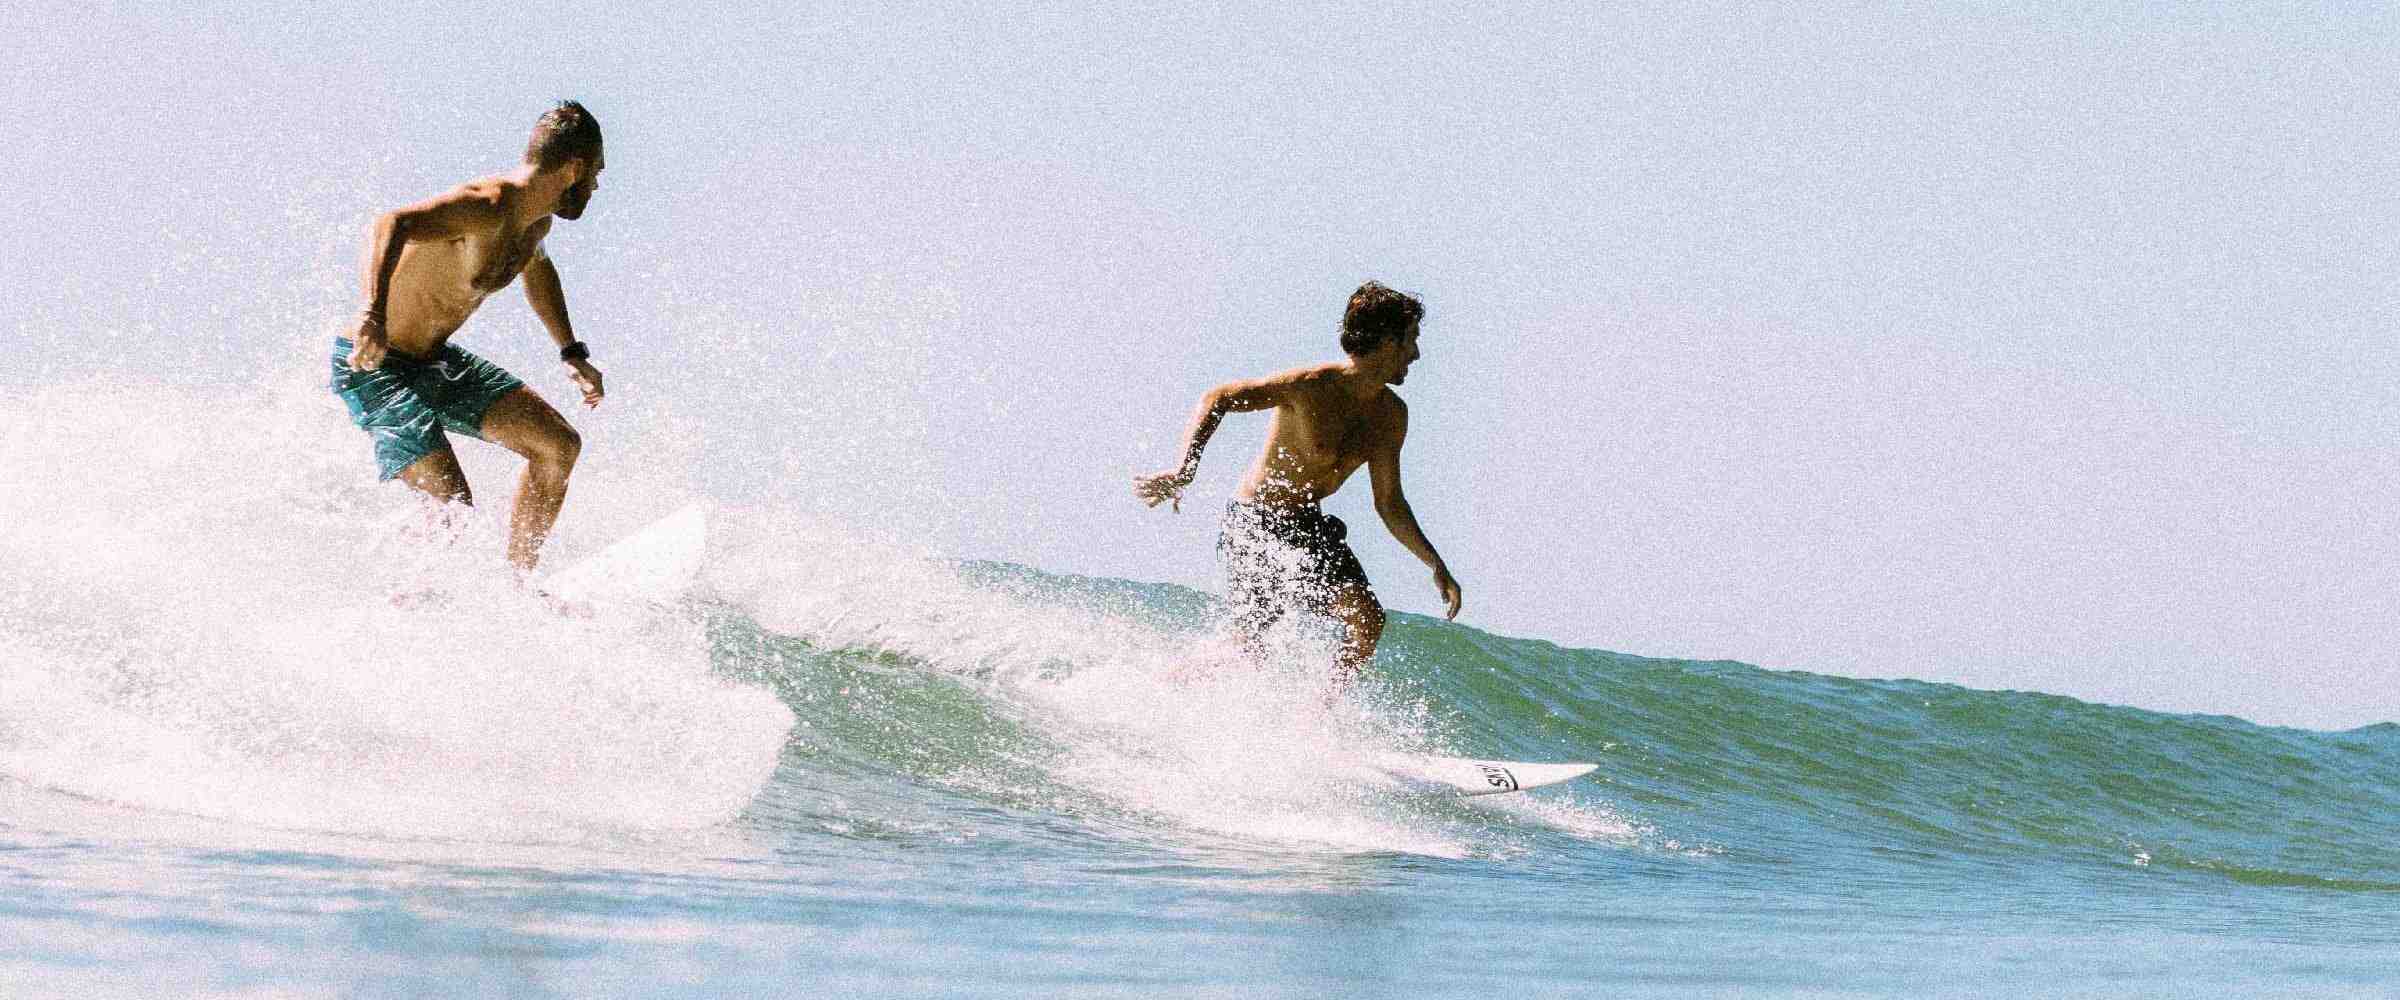 How did surfing begin?